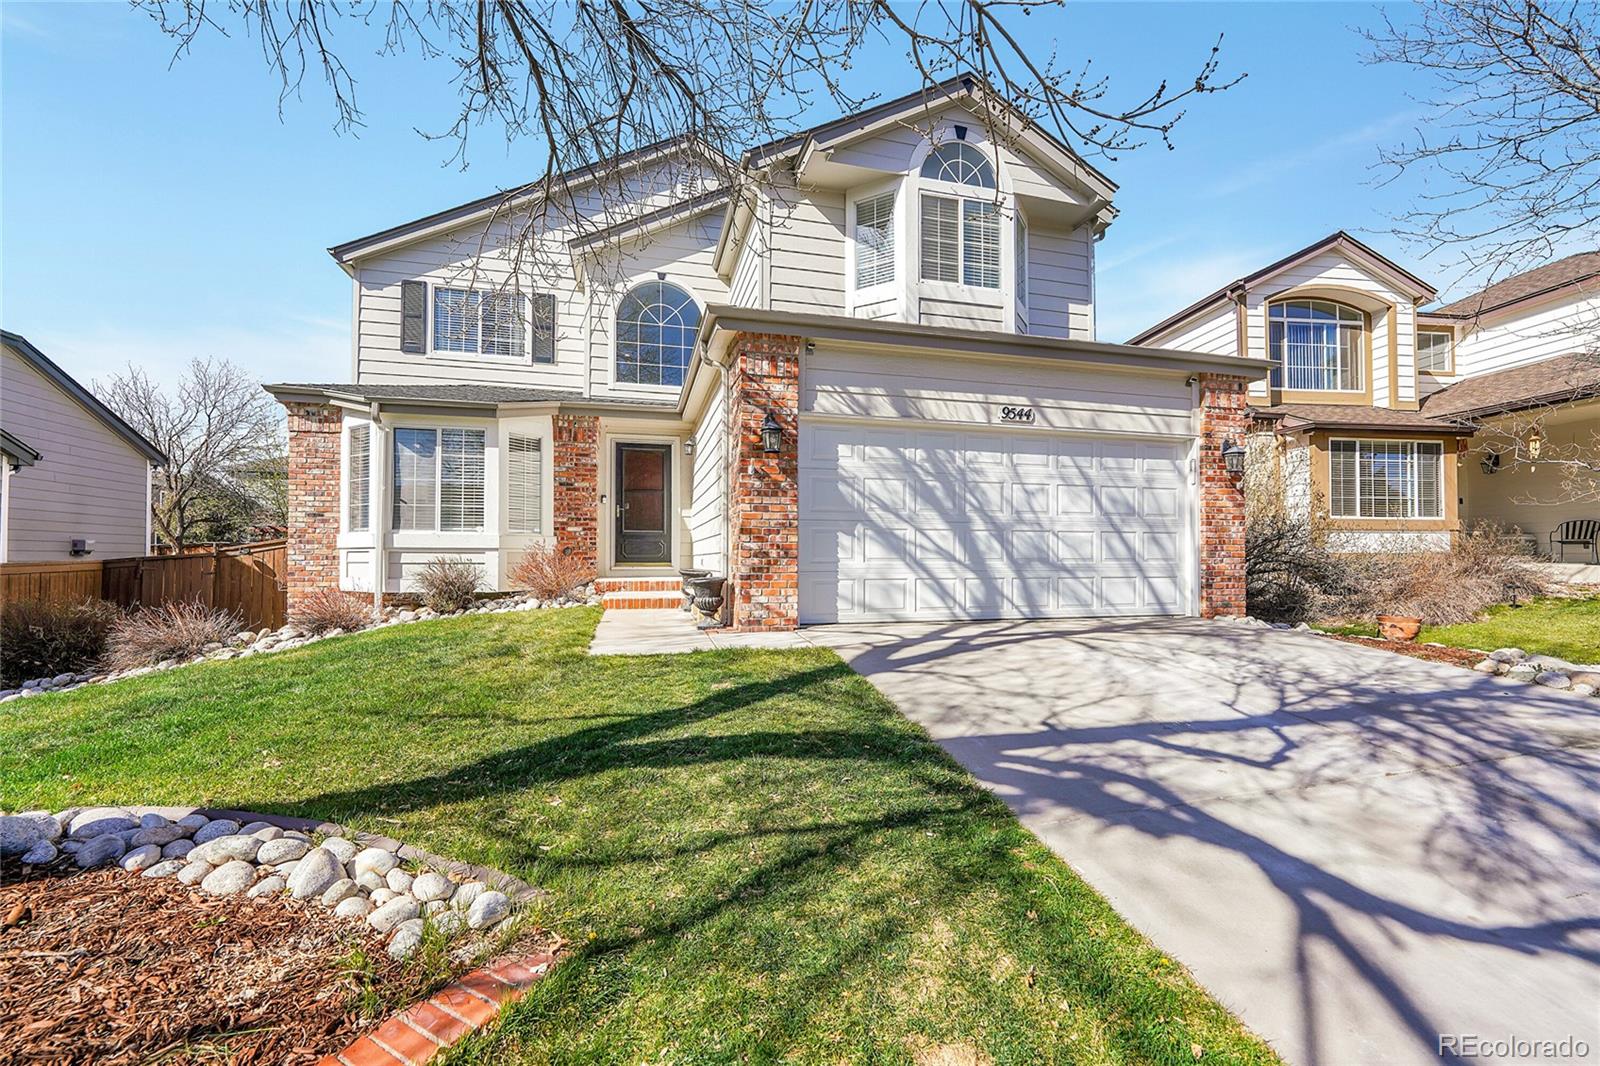 Report Image for 9544  Golden Eagle Place,Highlands Ranch, Colorado